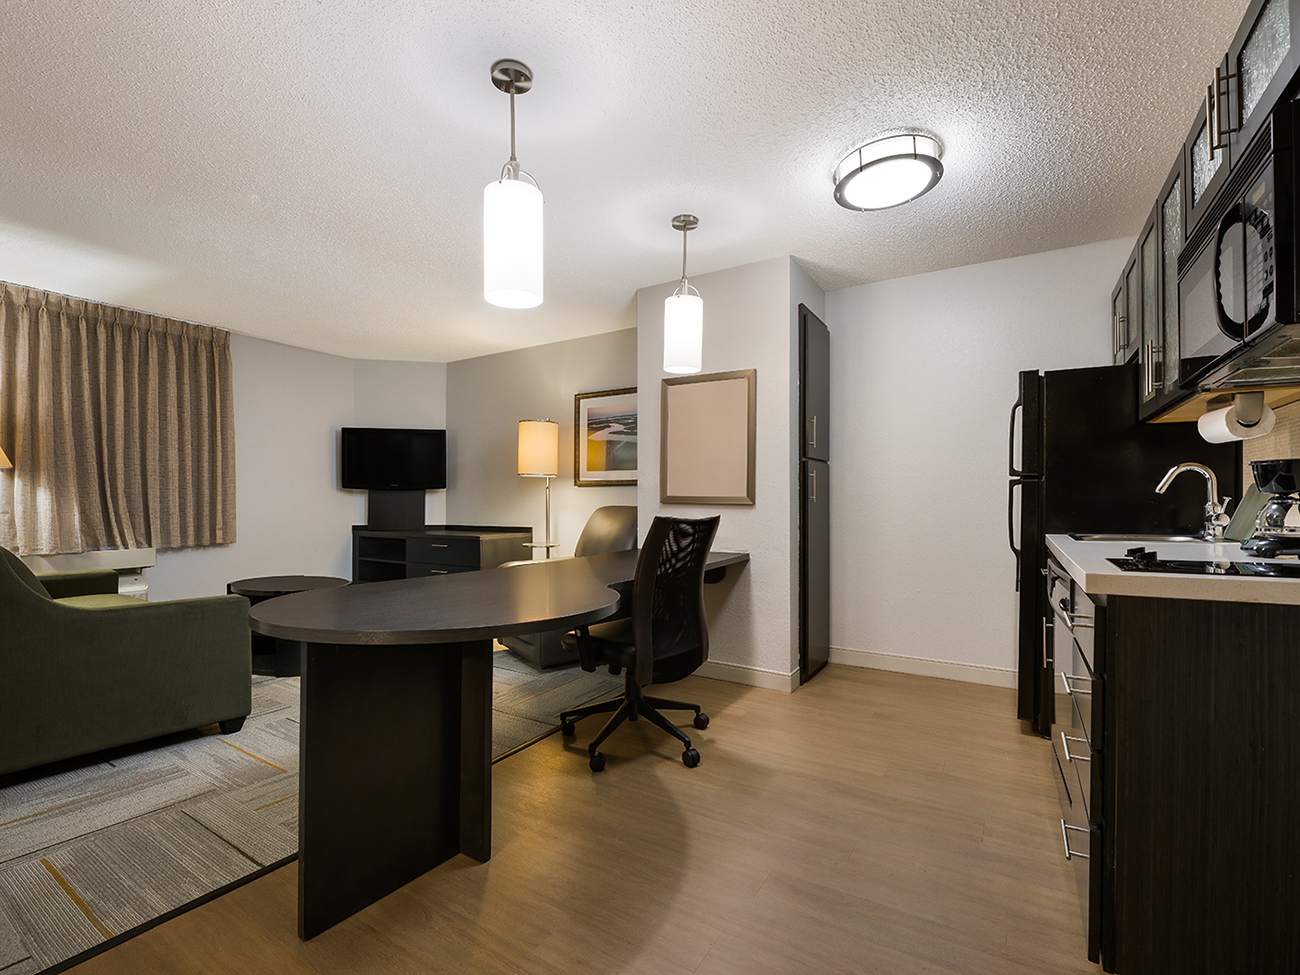 Interior of the One Bedroom Suite at Sonesta Simply Suites Huntsville Research Park.